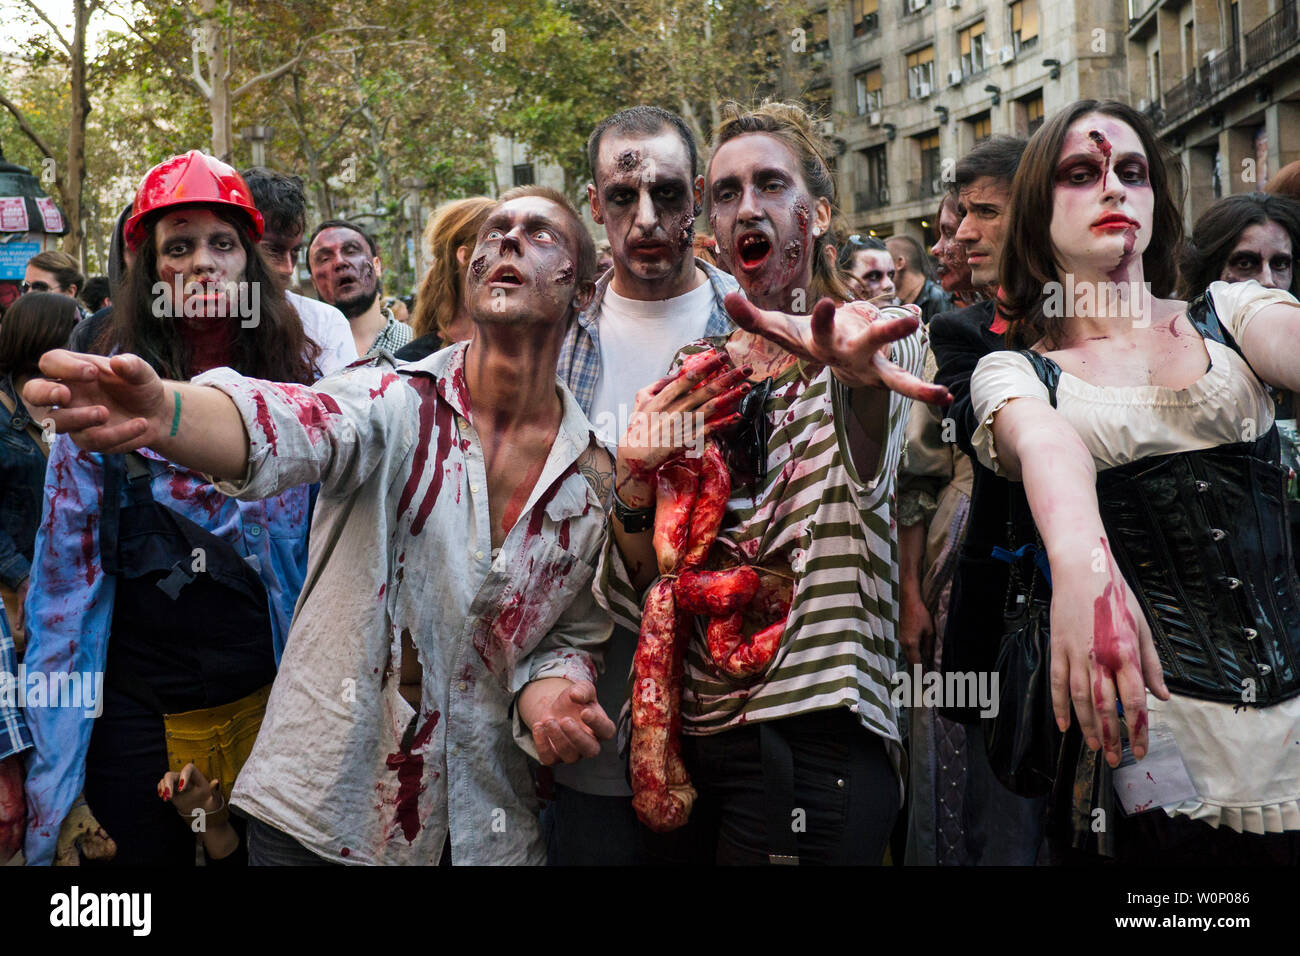 Belgrade, Serbia - October 20, 2012: People masked as zombies parades on streets during a zombie walk. Zombie walk is organized before Serbian SF movi Stock Photo